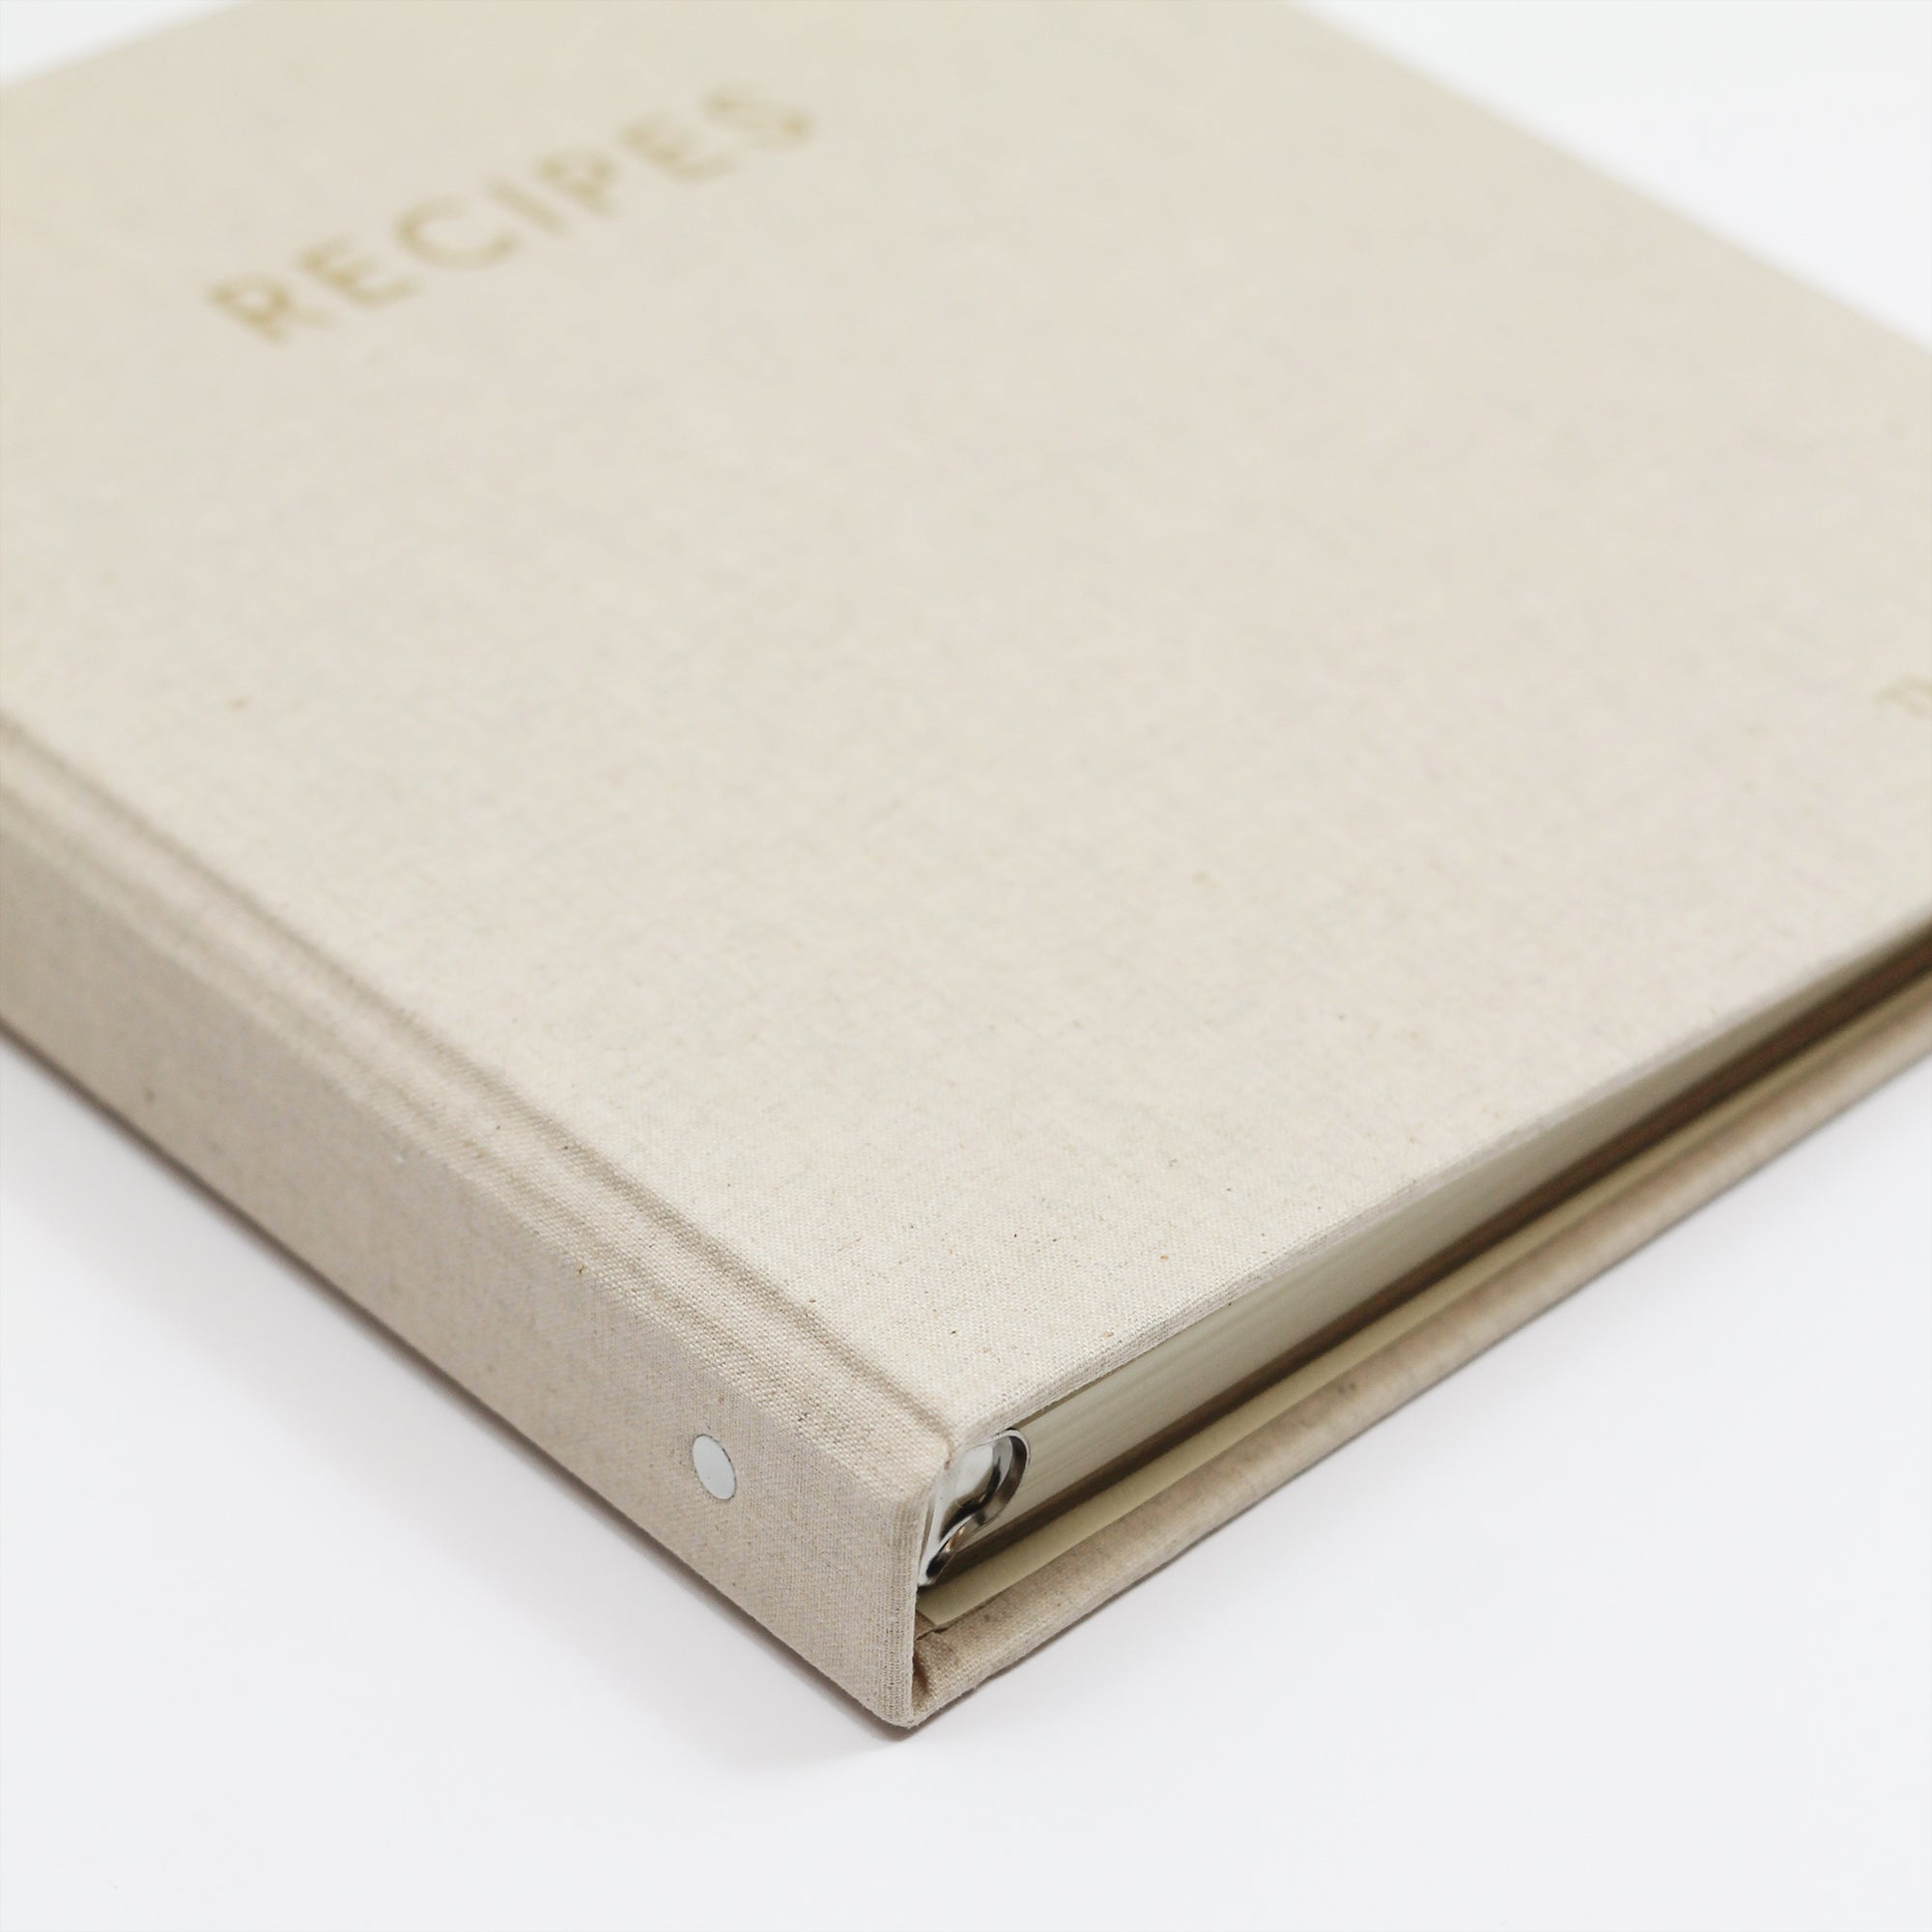 Recipe Journal Embossed with RECIPES covered with Natural Linen - Rag &  Bone Bindery